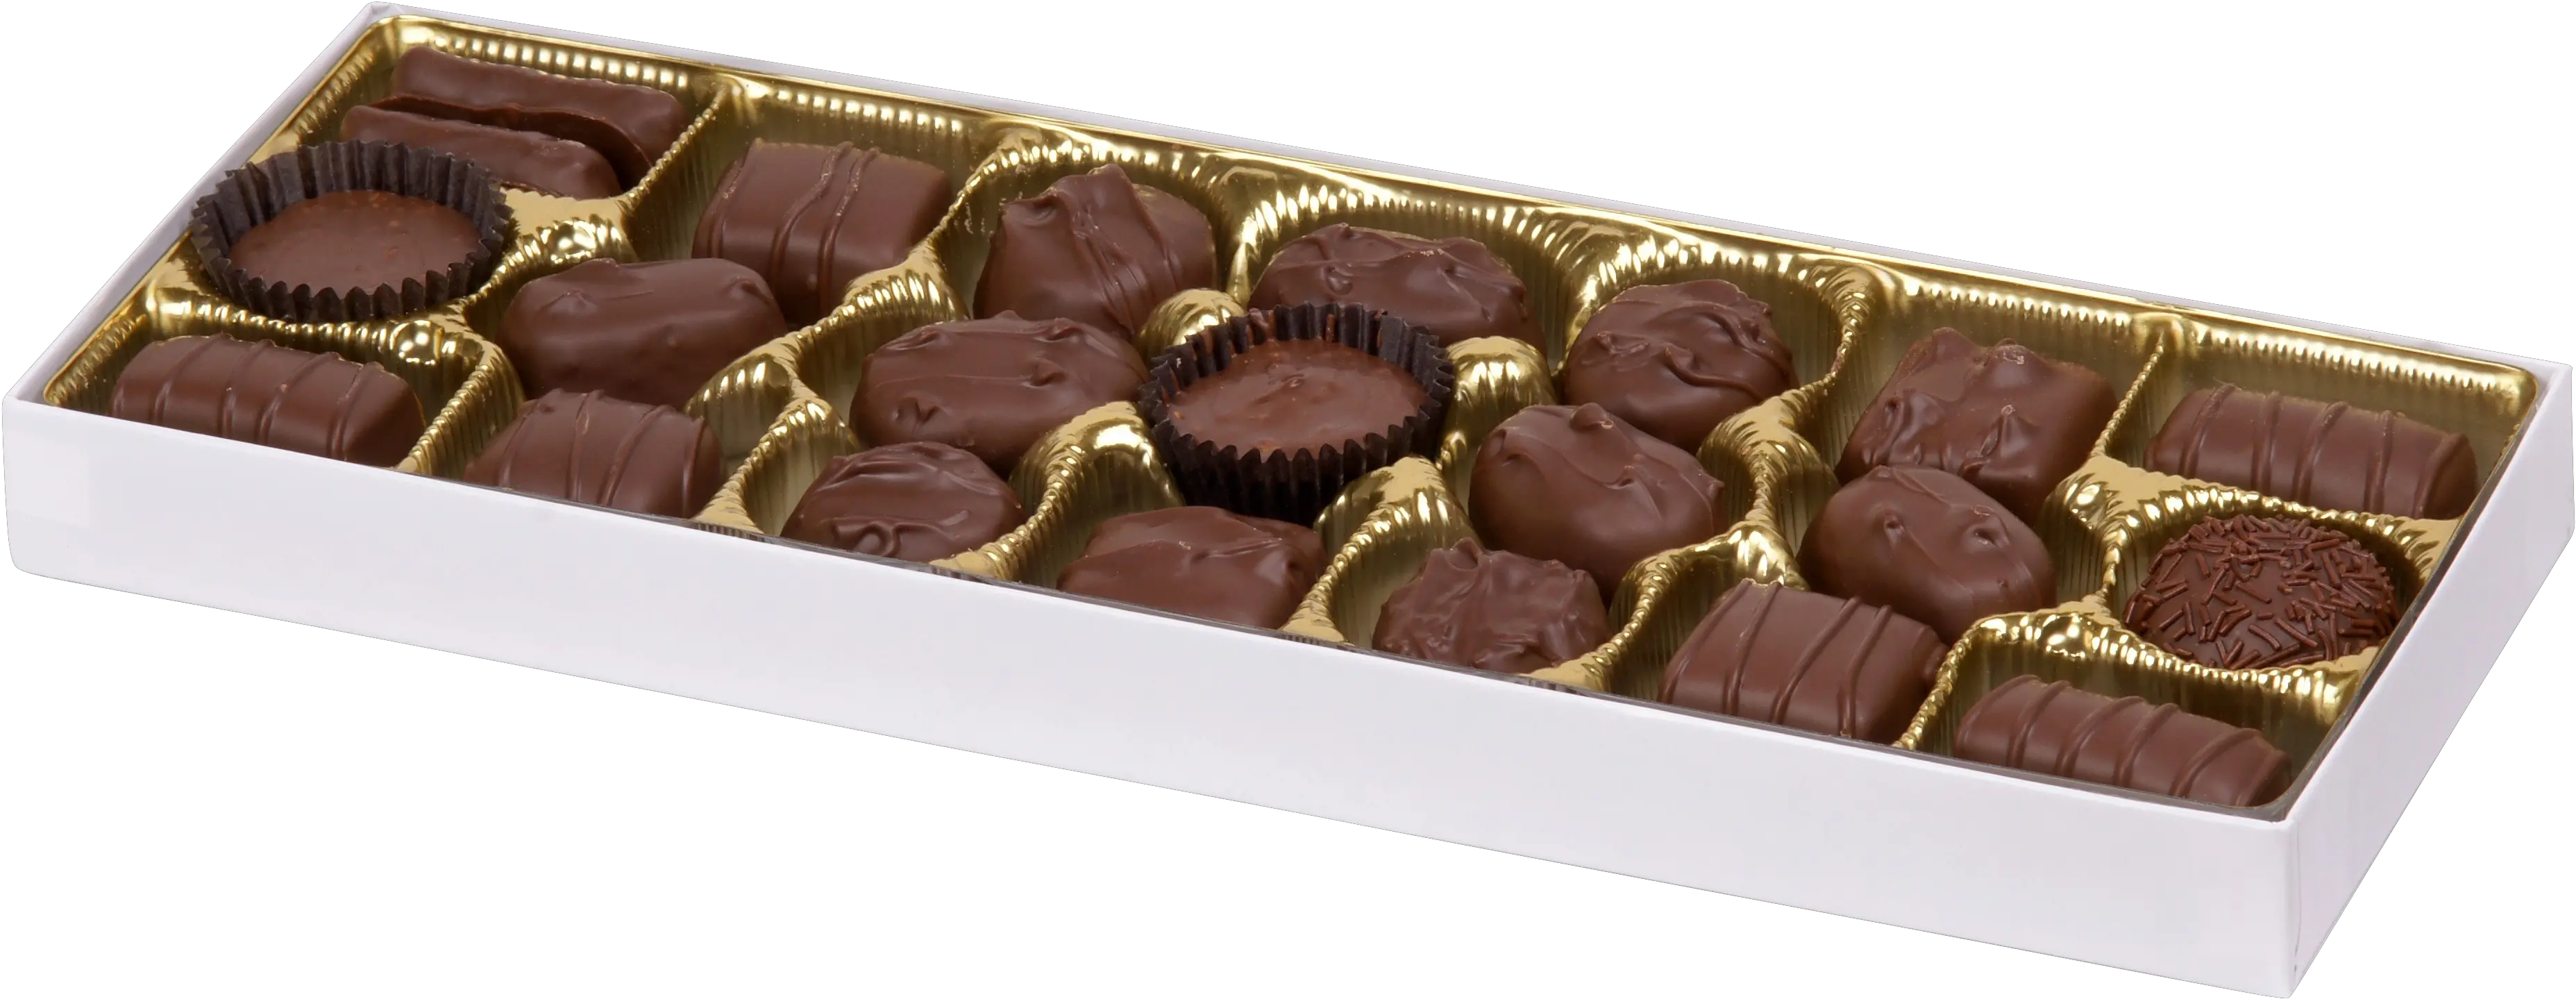 Download Chocolates Buck Png Image For Free Box Of Chocolate No Background Buck Png